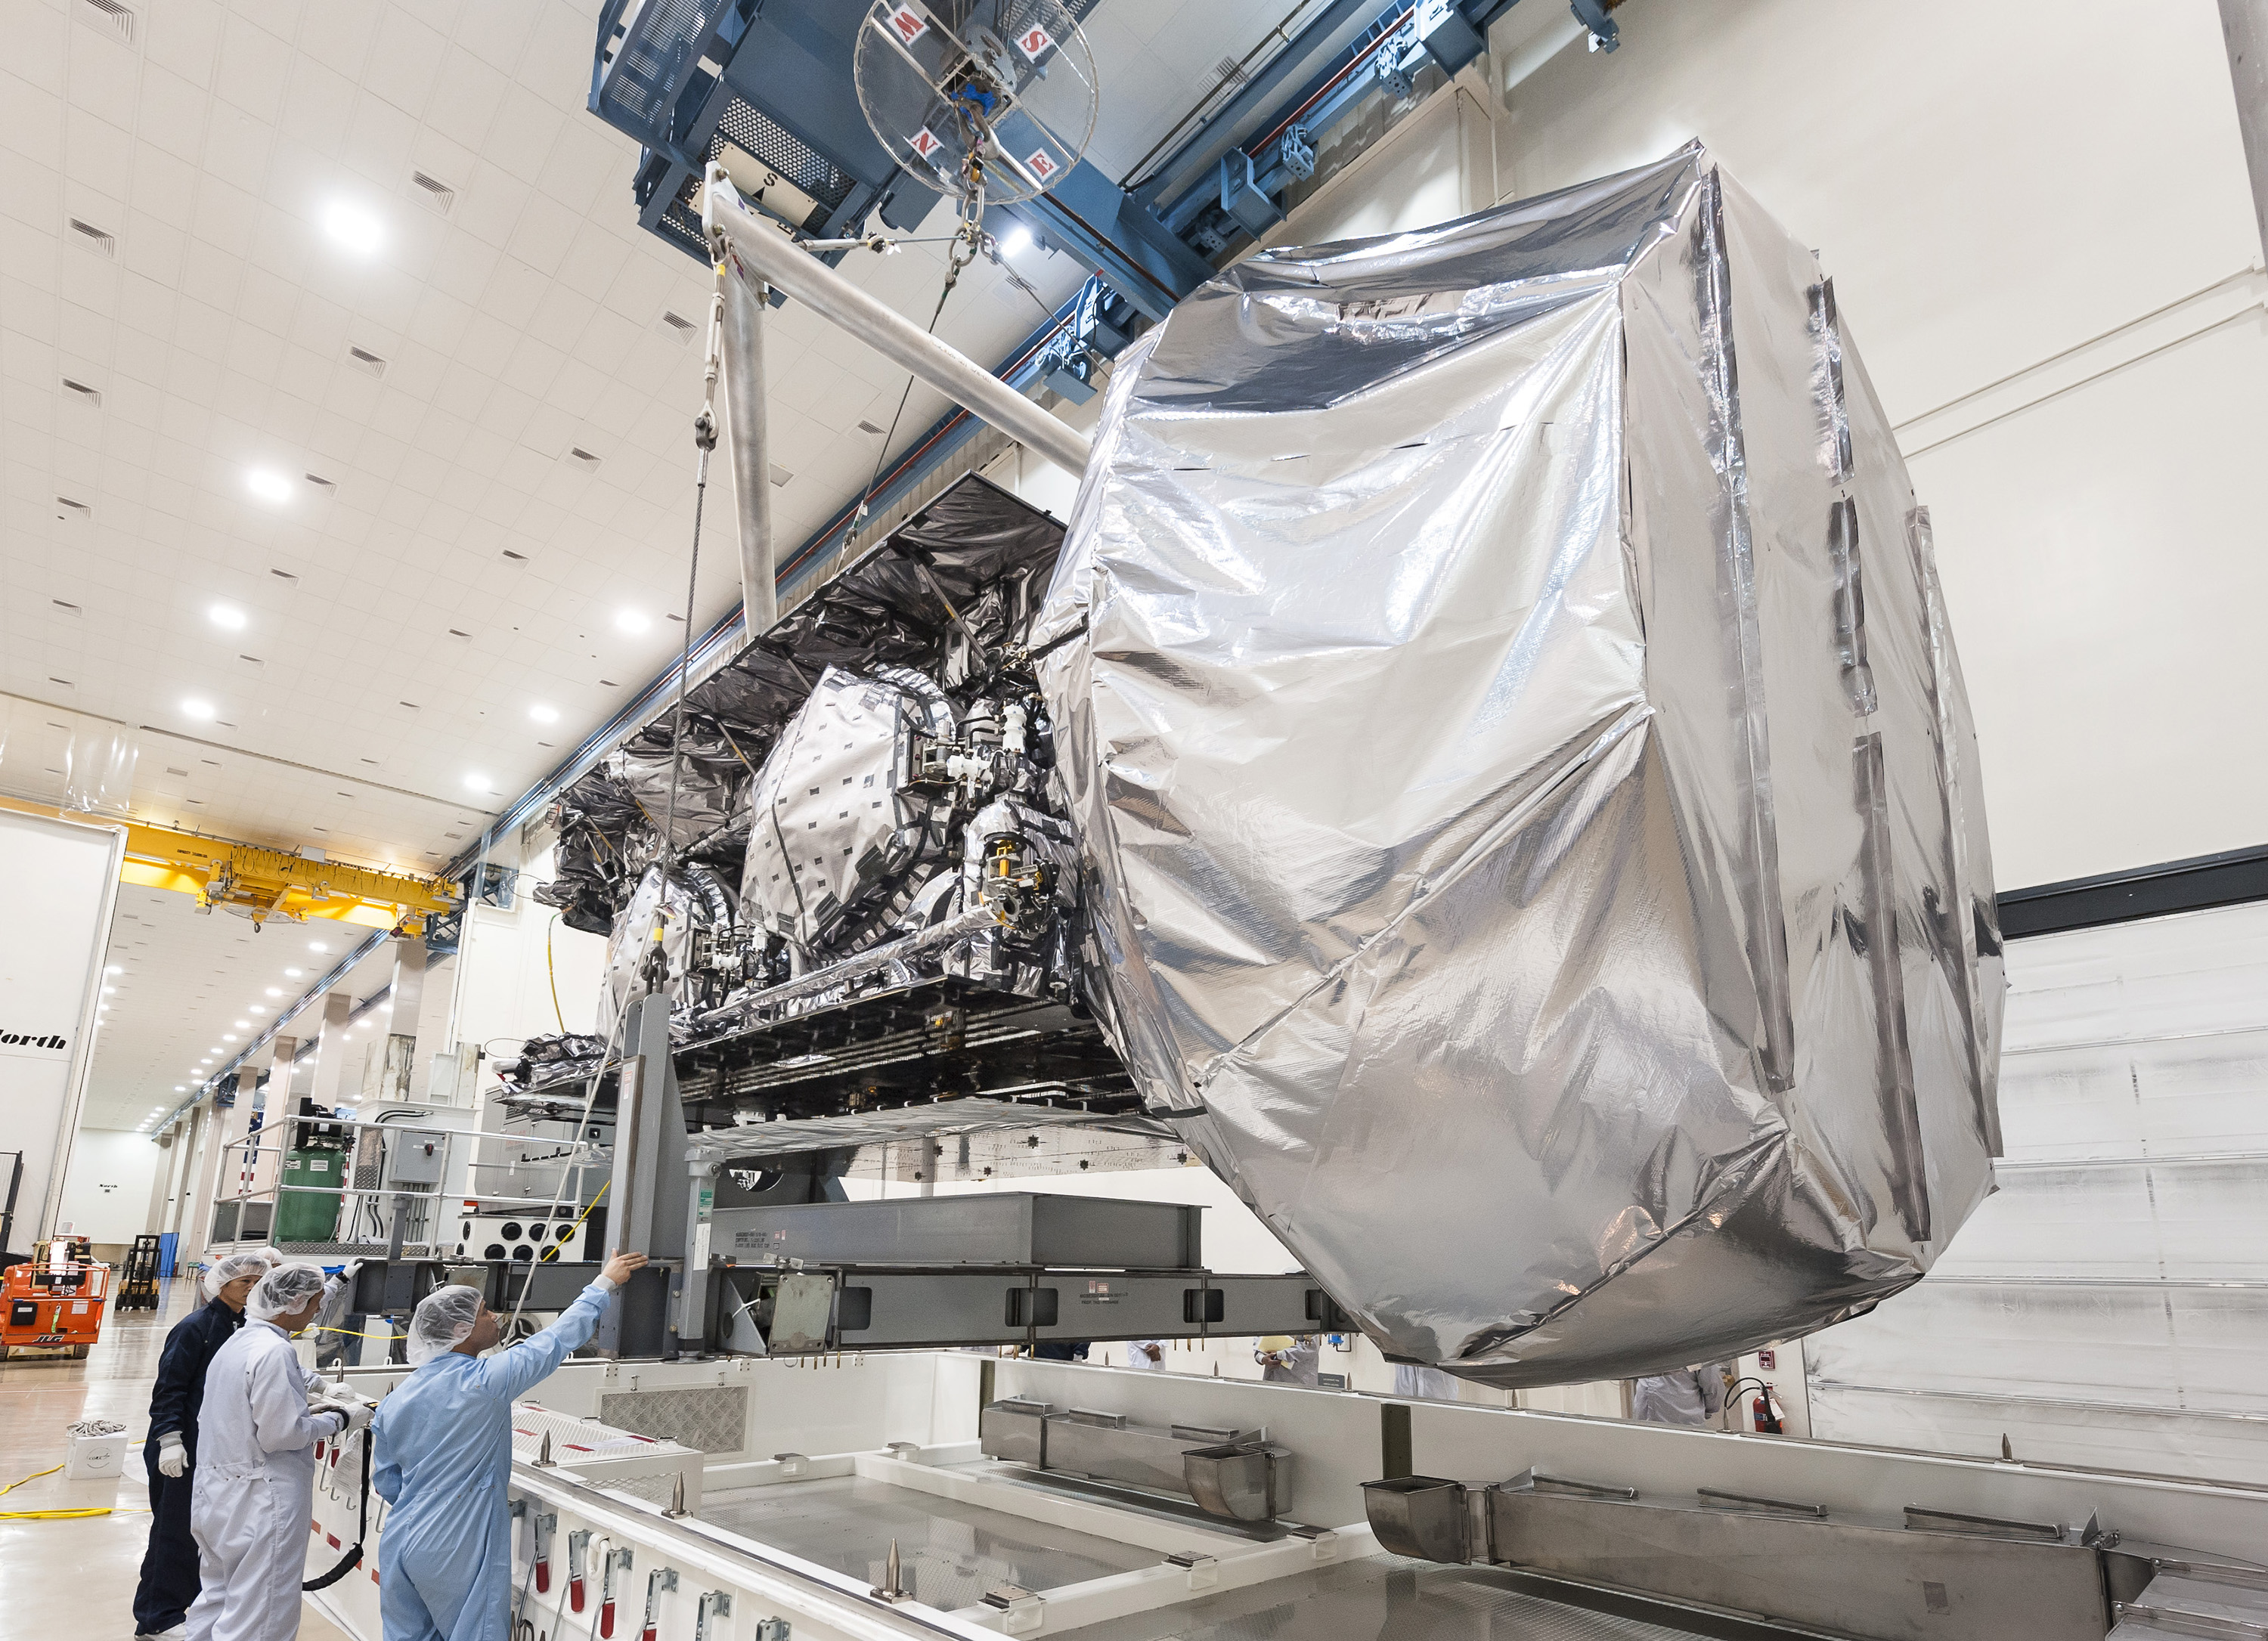 Crews with Lockheed Martin lifting the NAVY's MUOS-3 satellite for placement in its shipping container fpr delivery to Cape Canaveral, Fla., ahead of a planned January 2015 launch. Photo Credit: Lockheed Martin